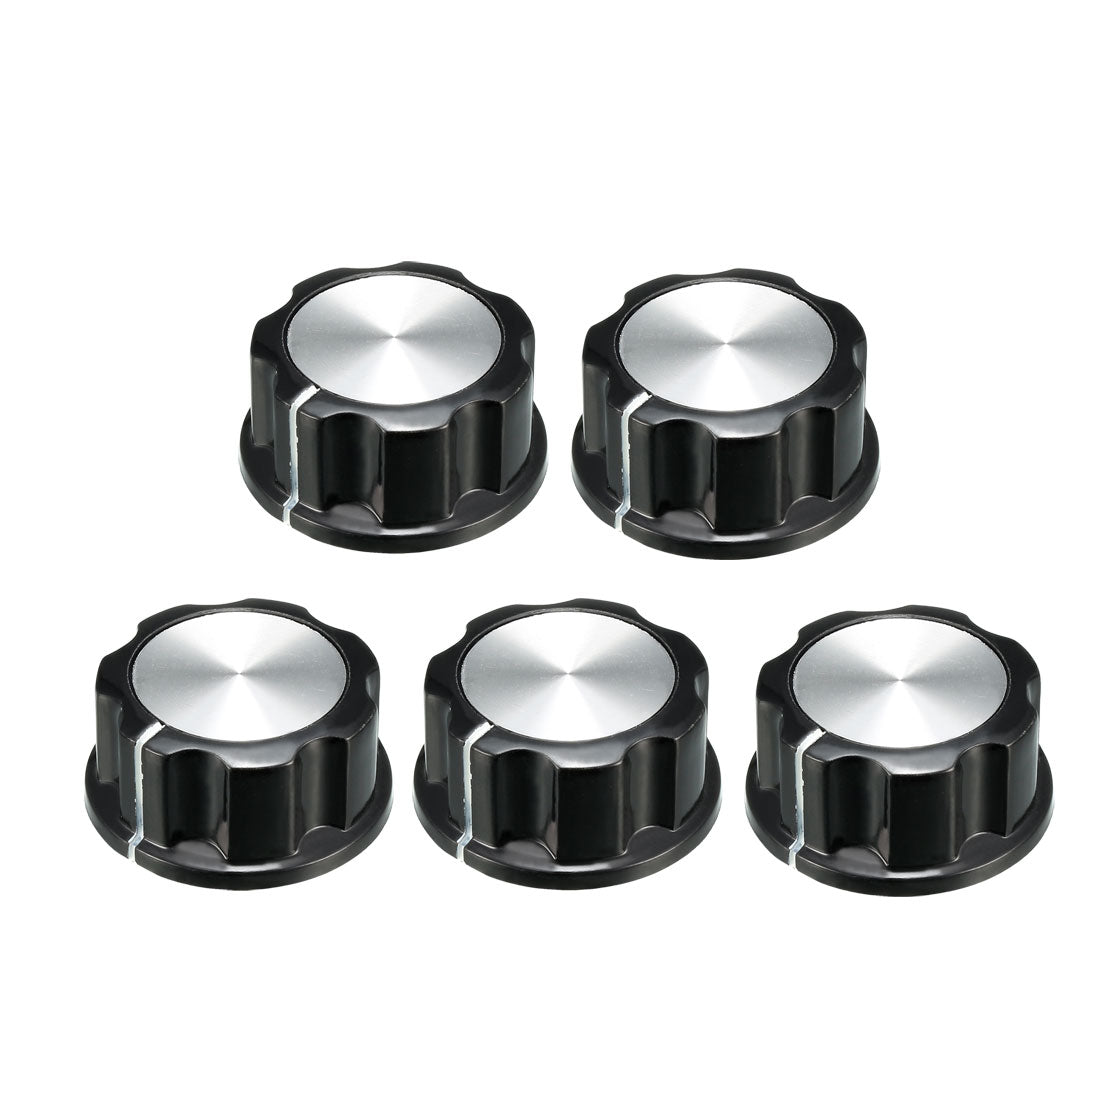 uxcell Uxcell 5Pcs 33x15.5mm Silver Tone Top Potentiometer Volume Control Rotary Knobs 6mm Shaft Hole